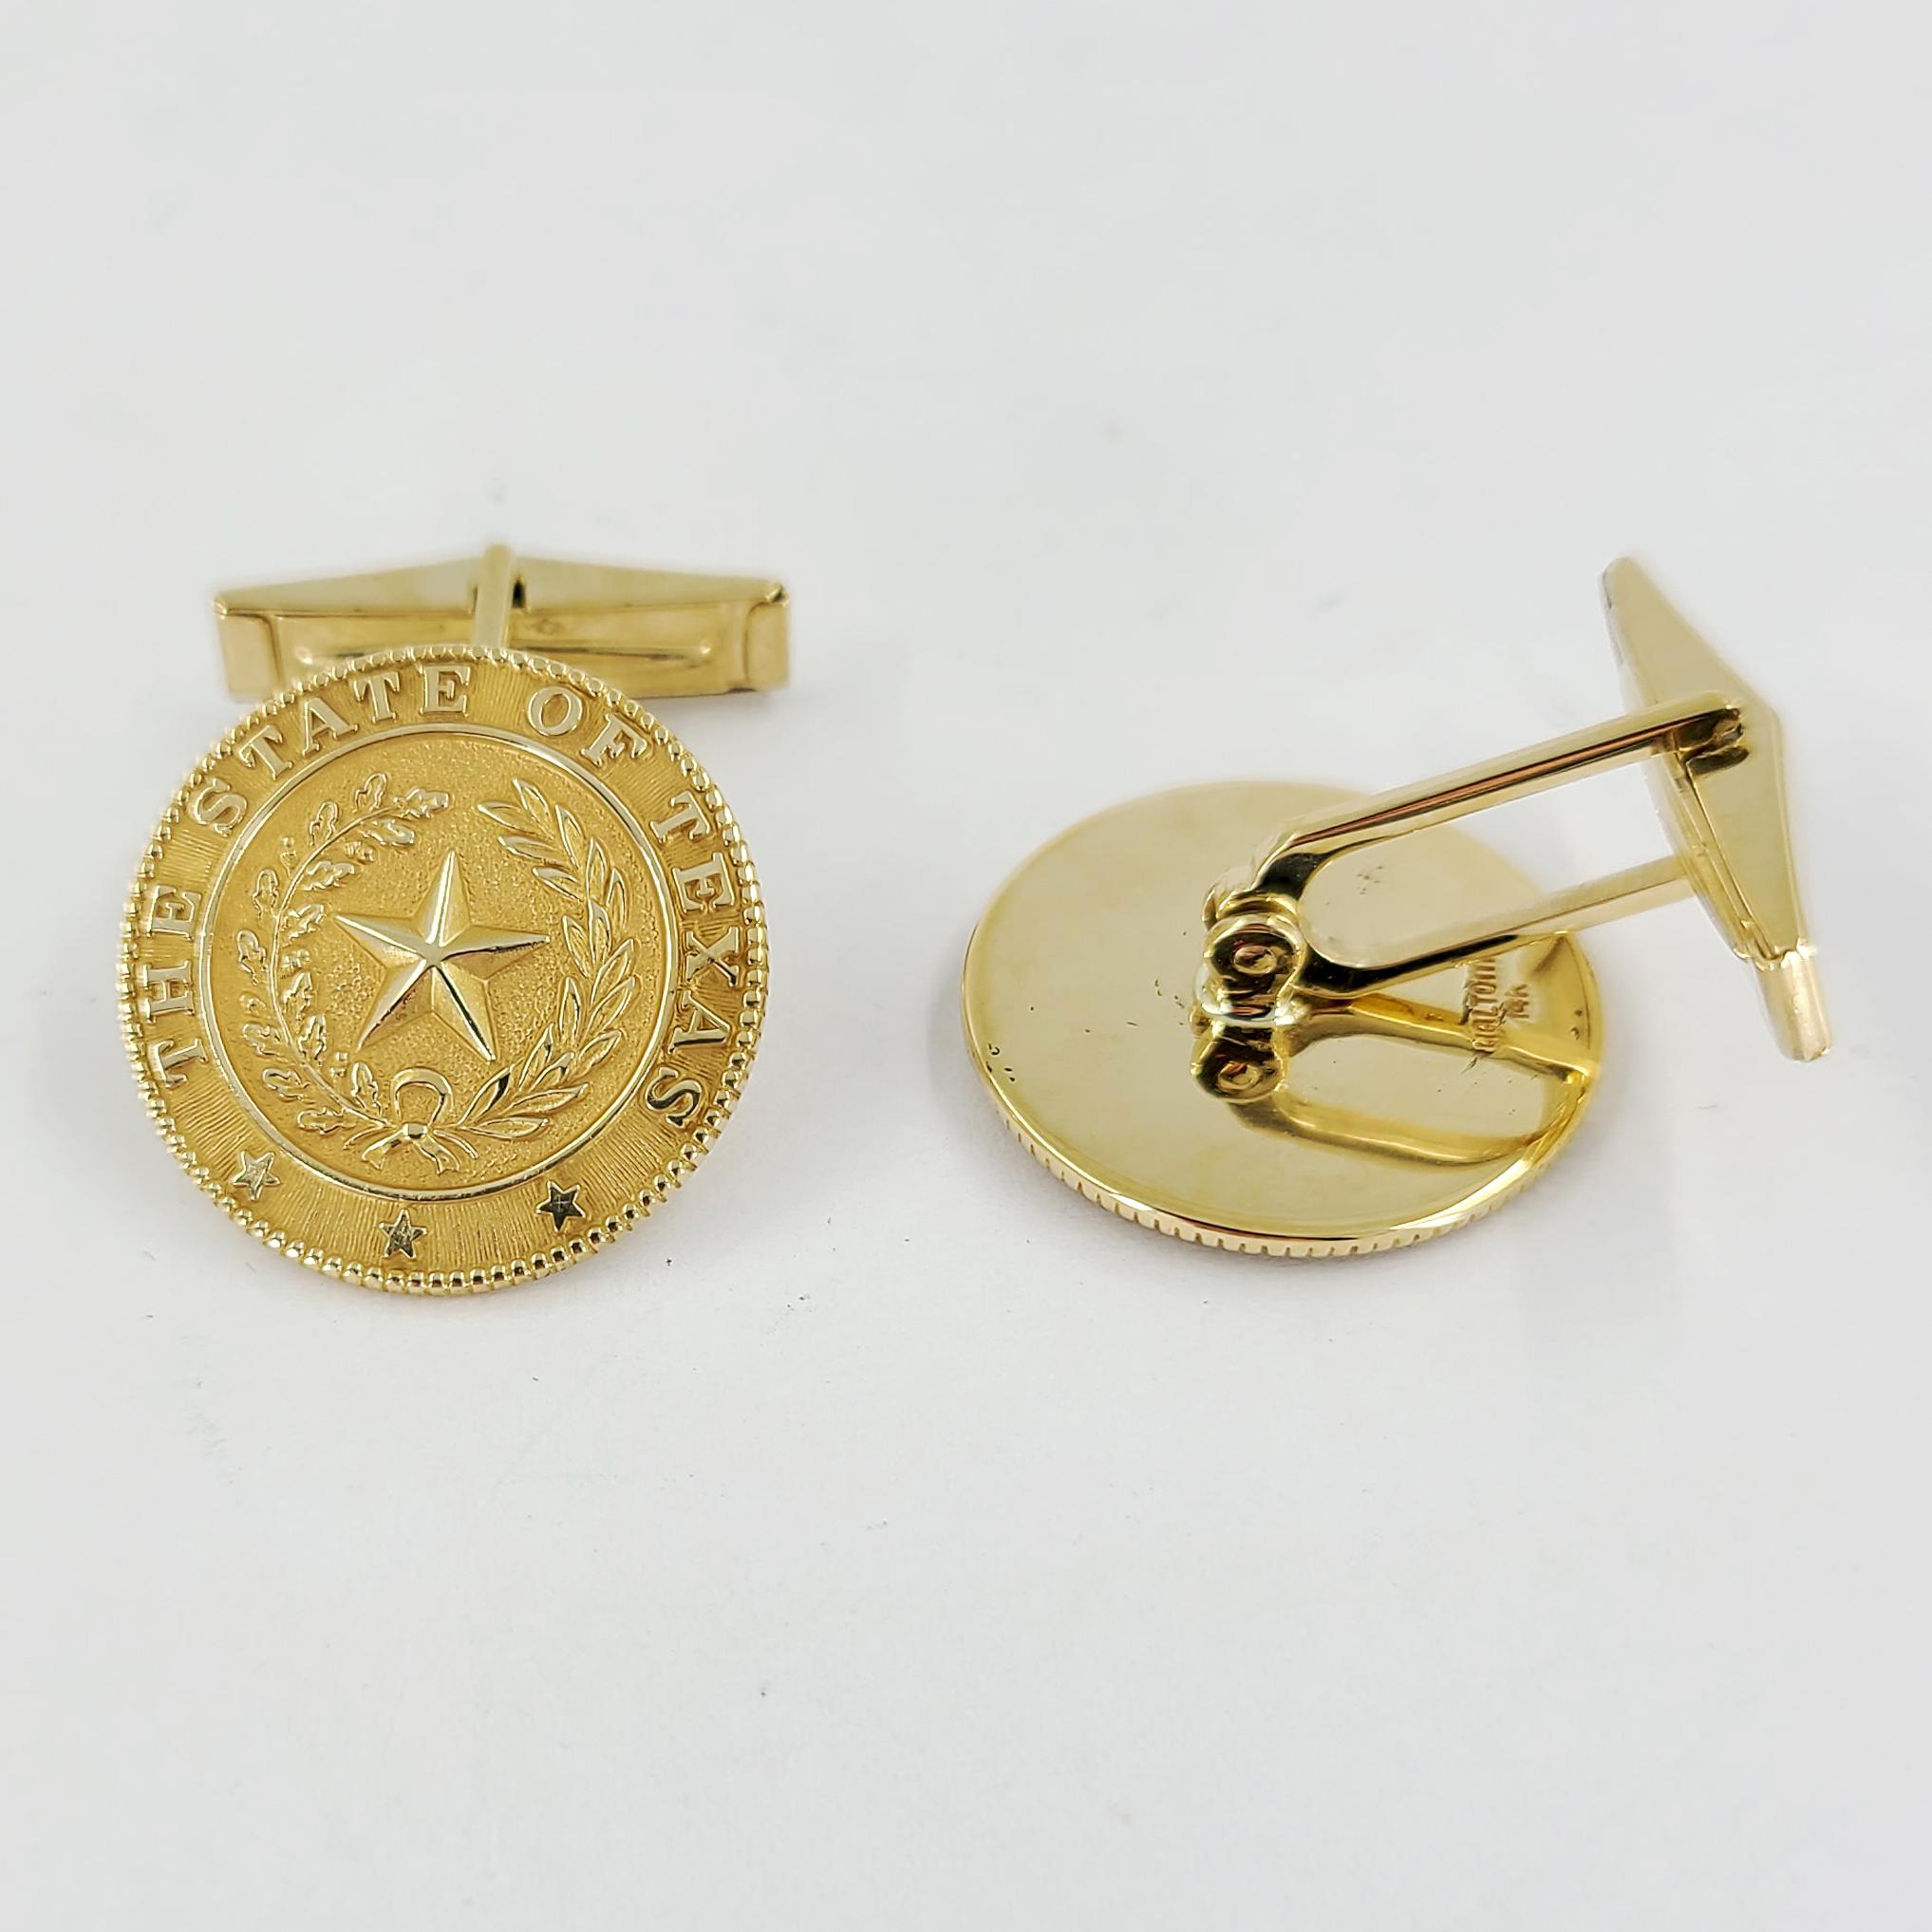 14 Karat Yellow Gold Star of Texas Cufflinks With Contrasting Textures. Hinged Top With Torpedo Back. Back Stamped 